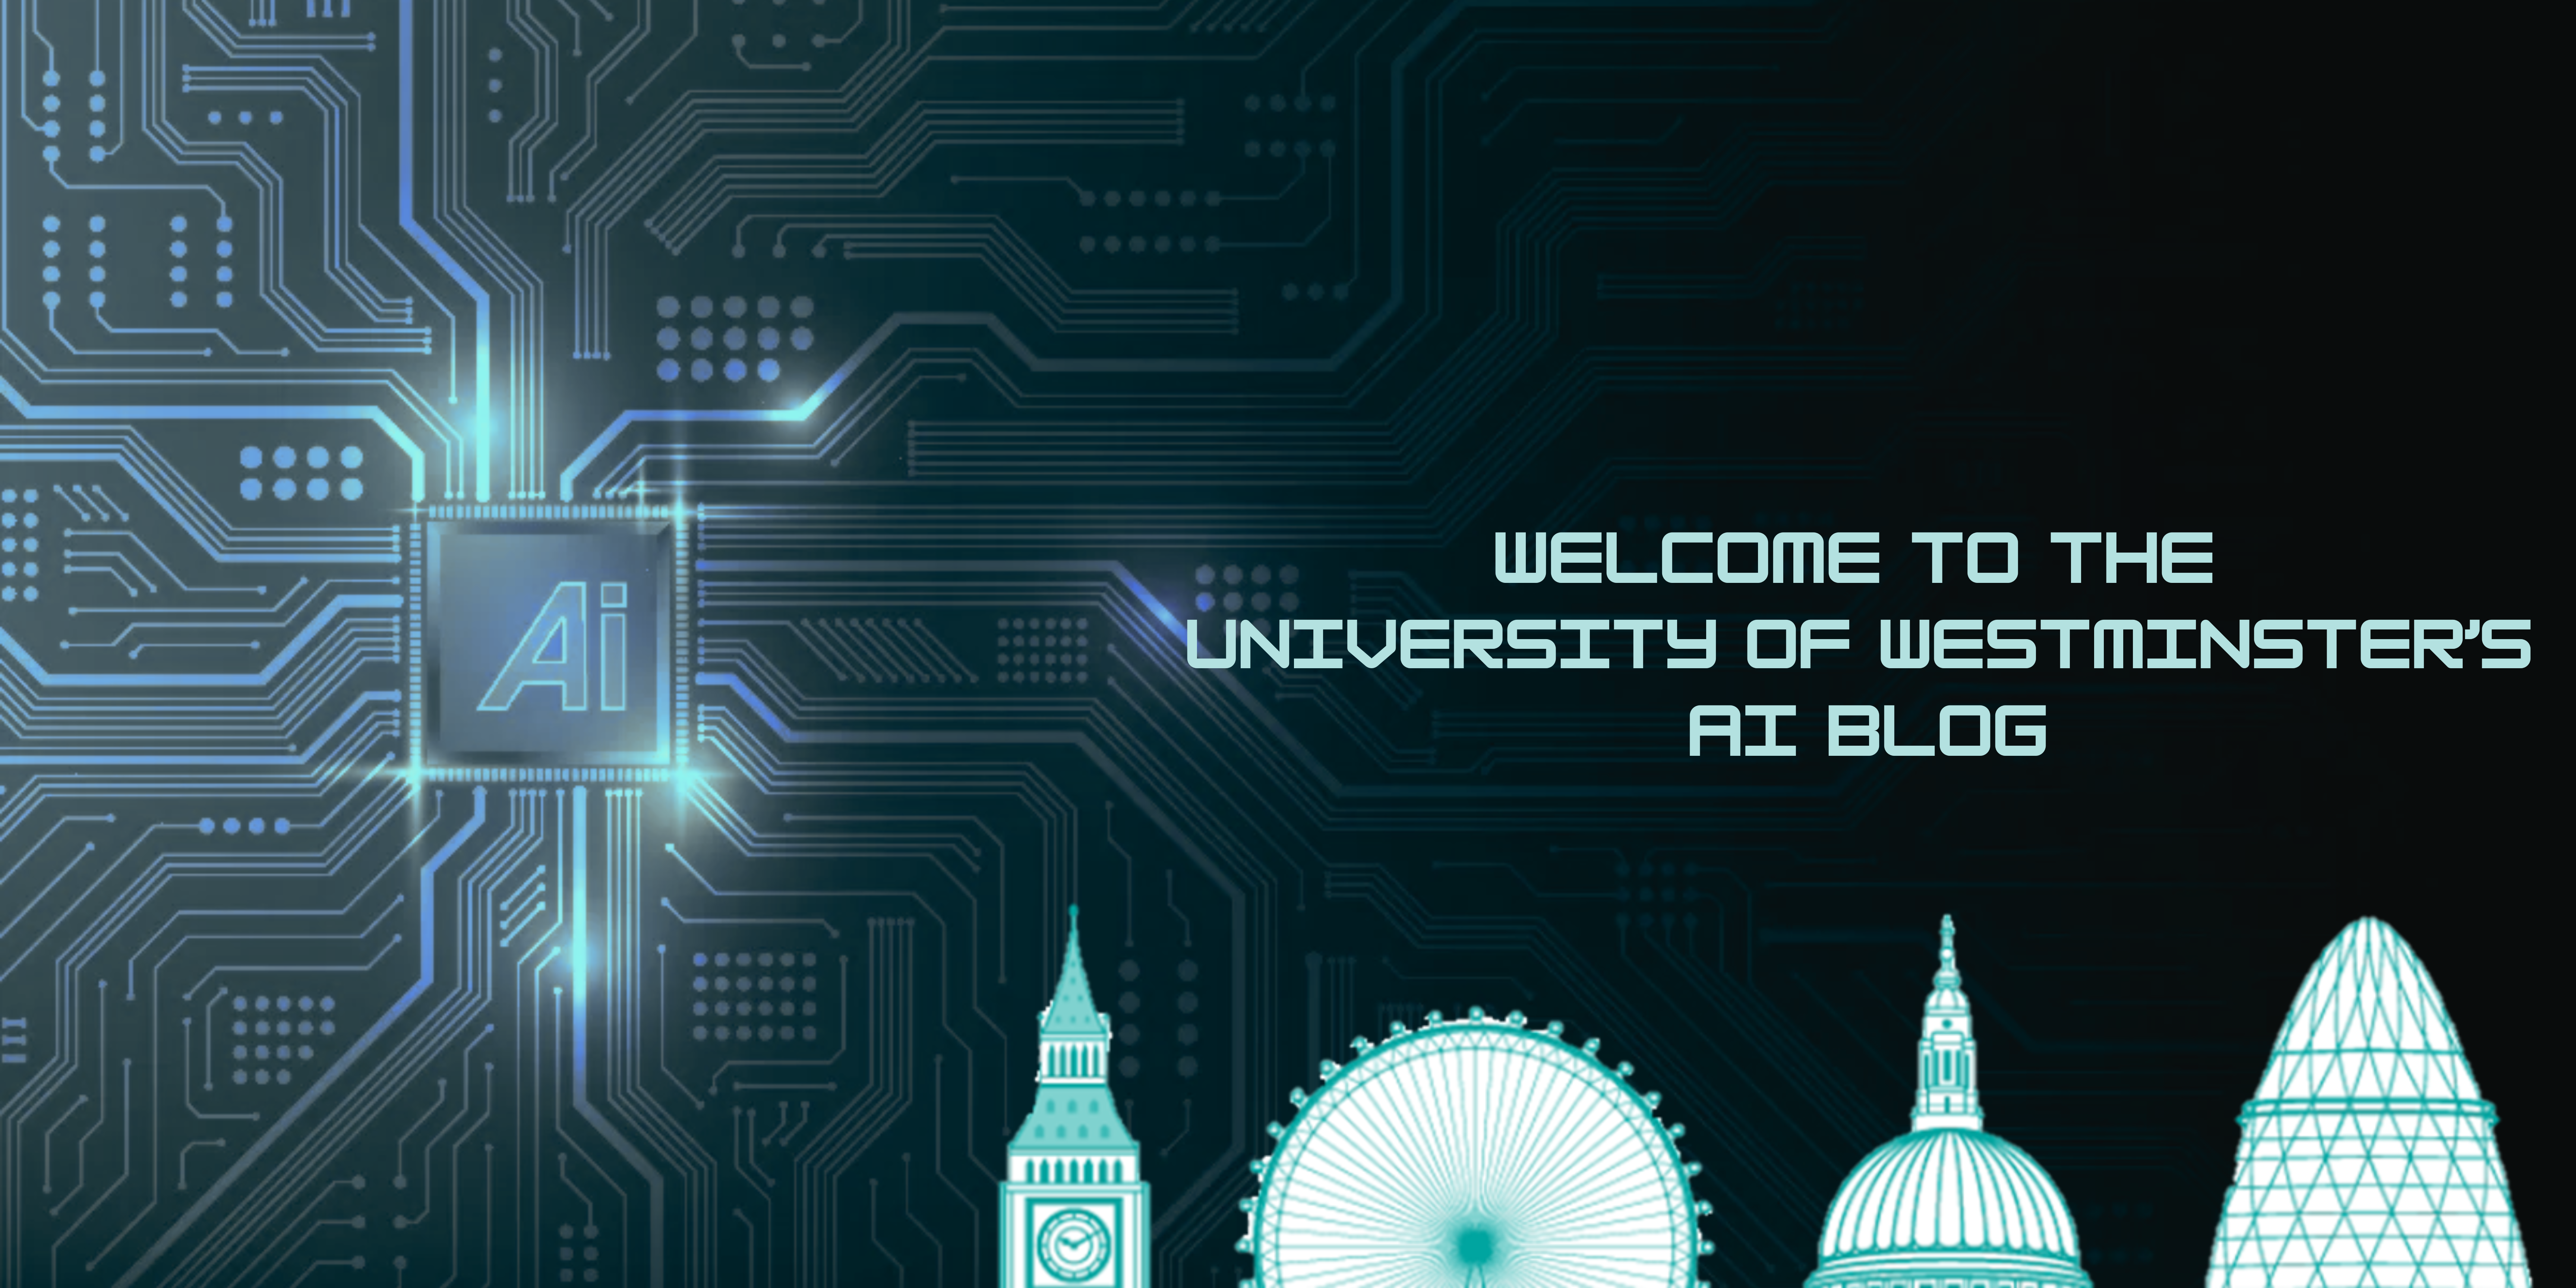 Welcome to university of Westminster’s AI blog